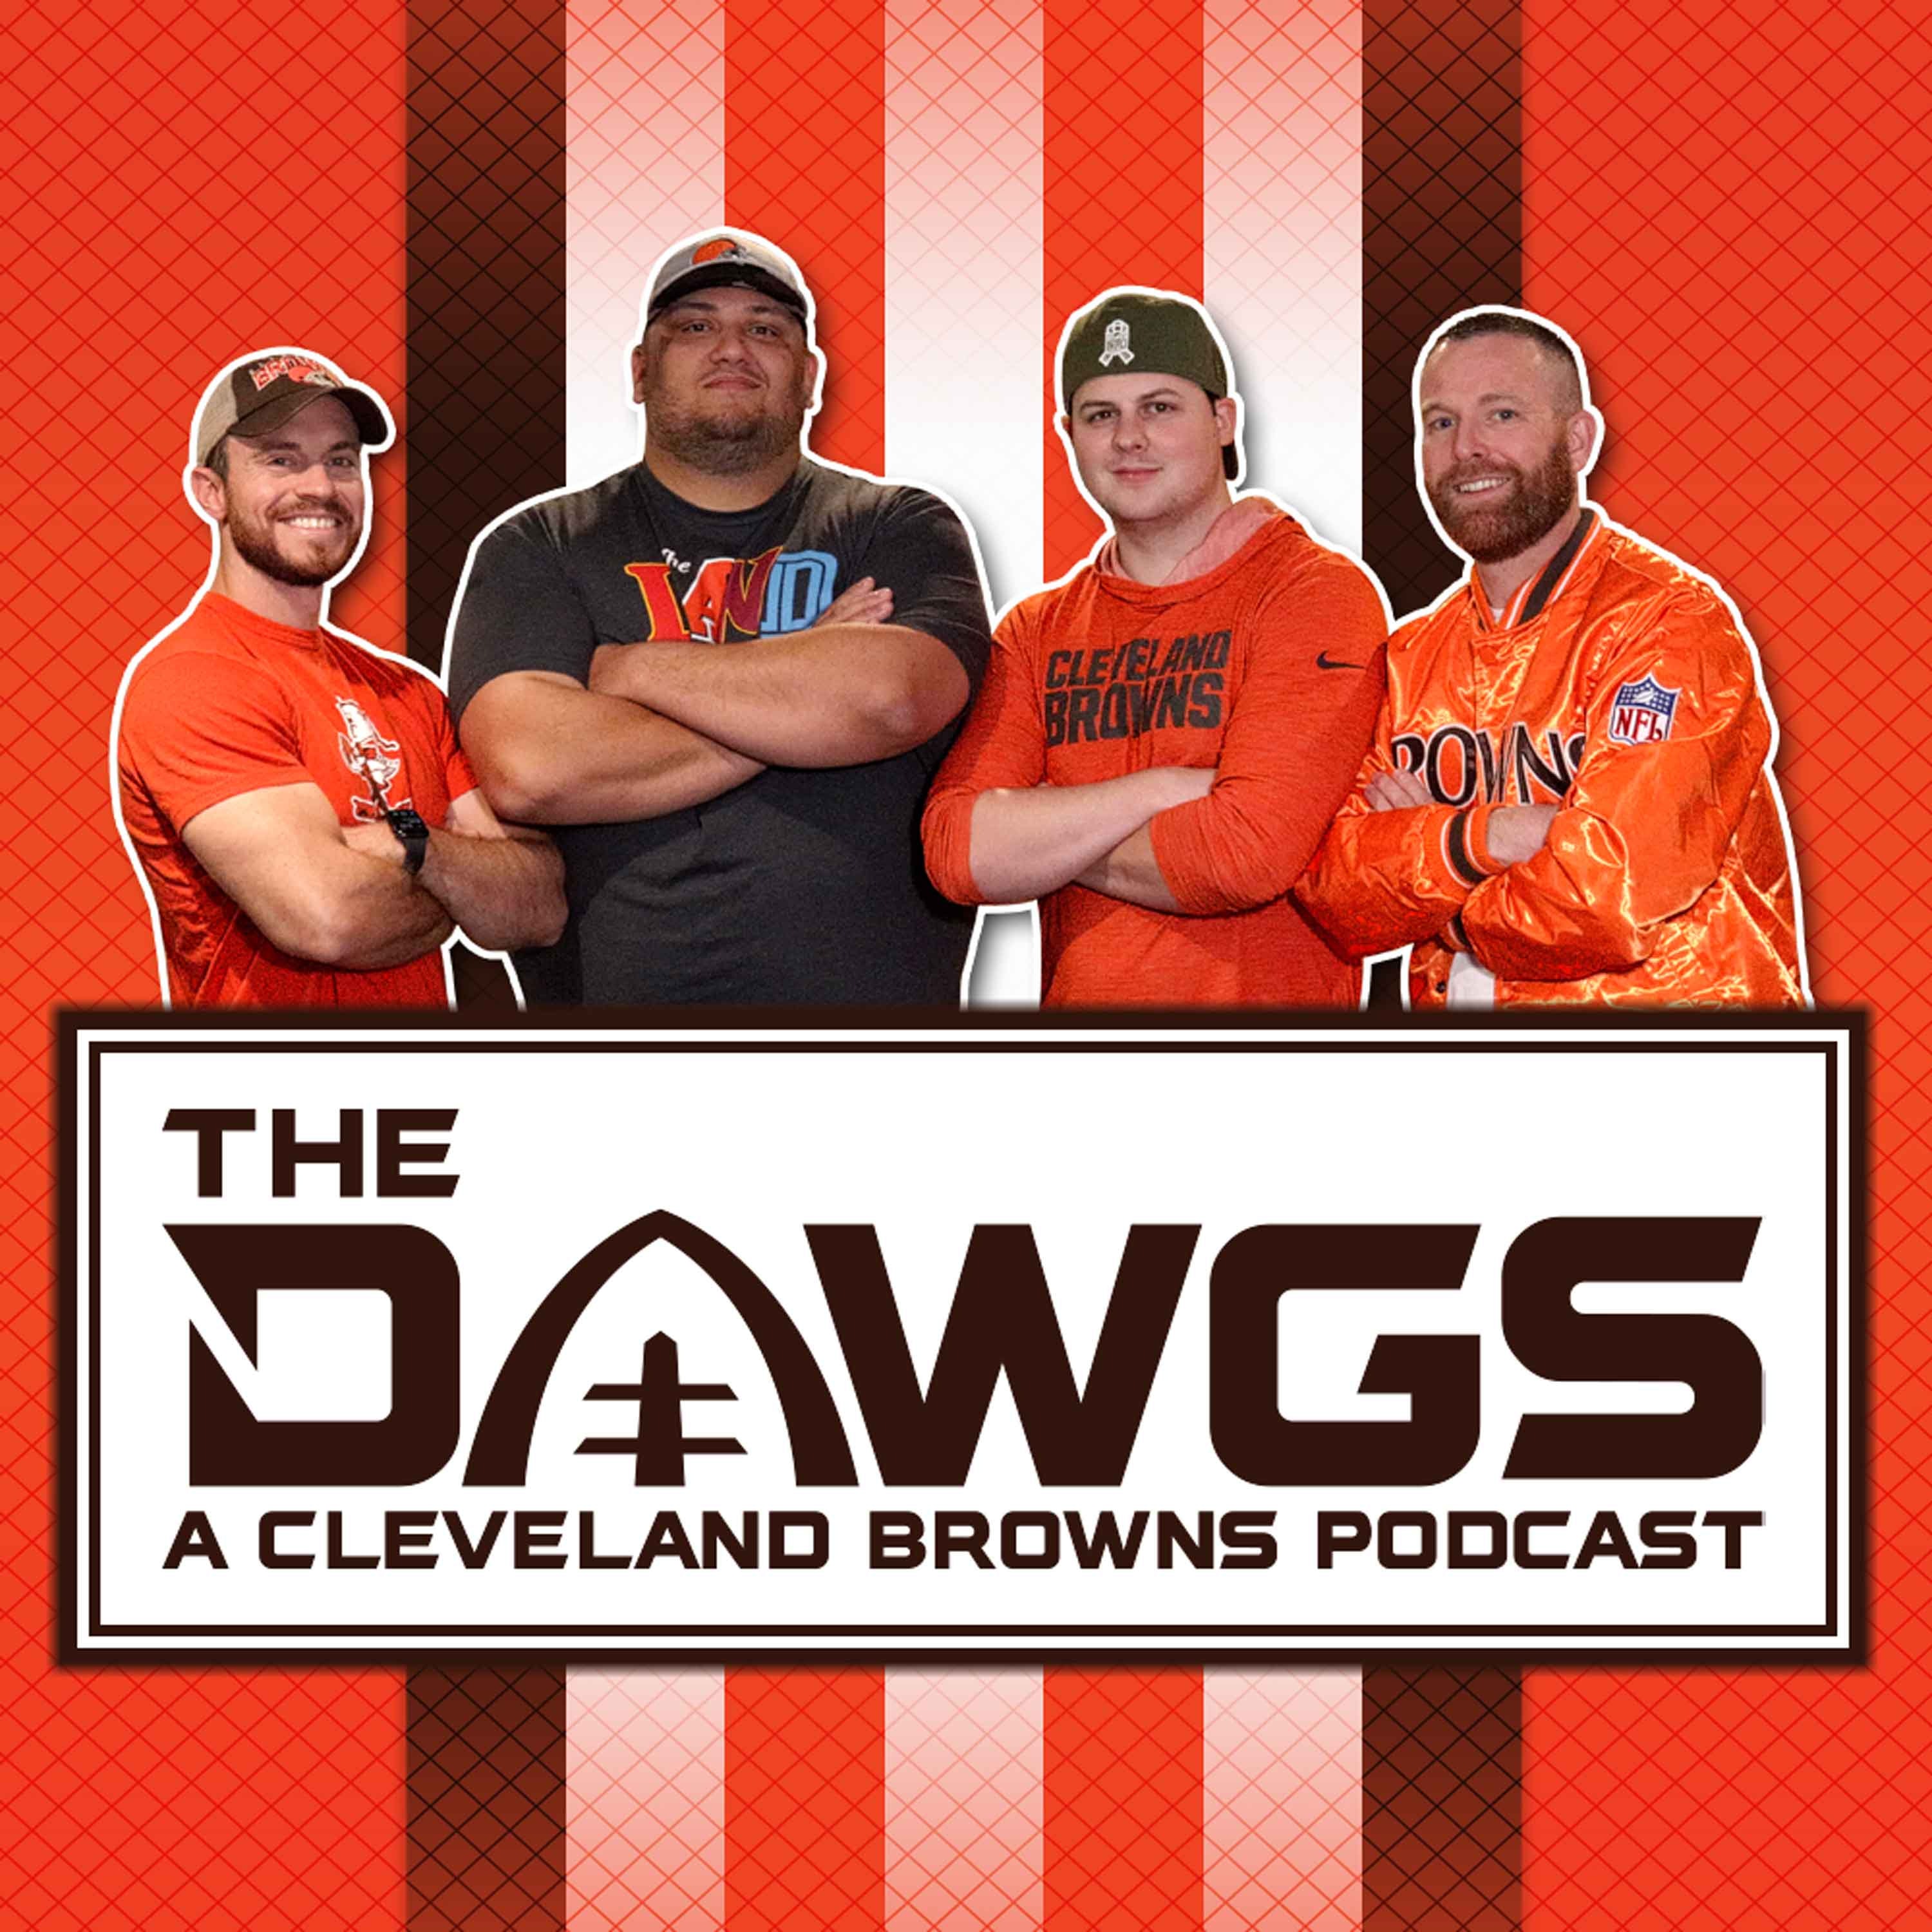 Week 5 Recap - Browns Can’t Close Against Chargers  | The Dawgs - A Cleveland Browns Podcast - October 11, 2022